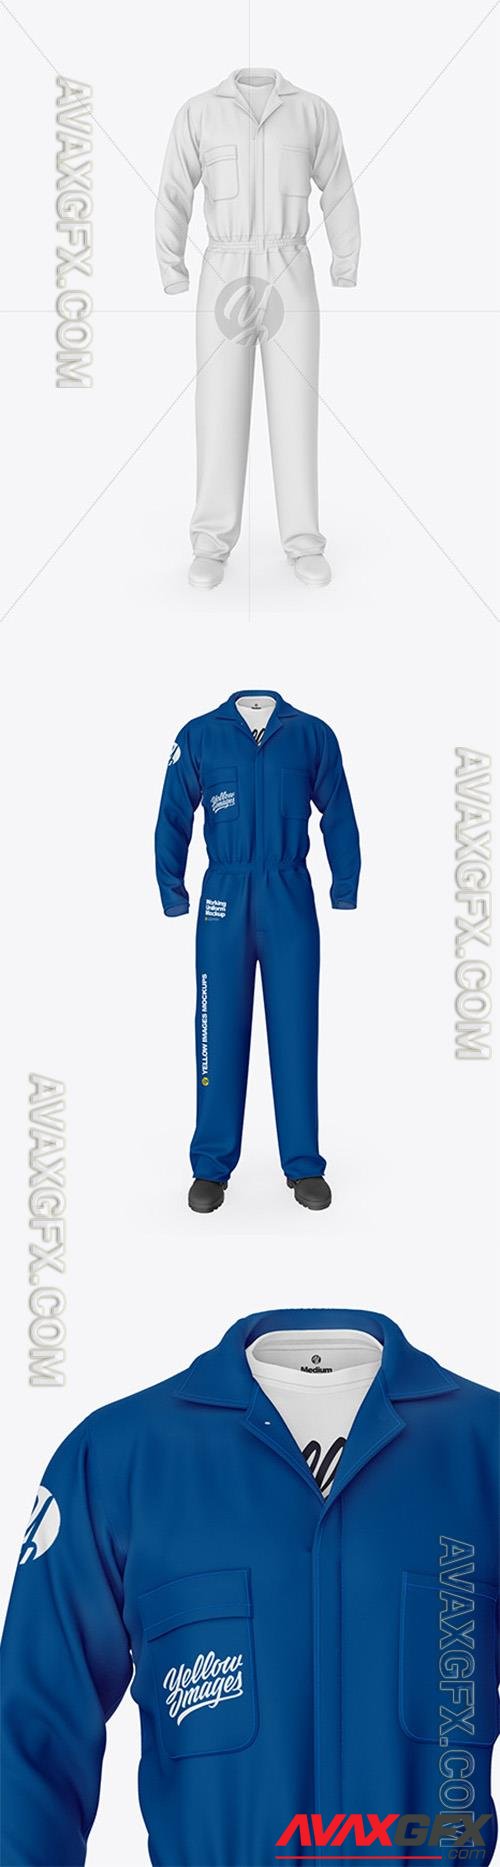 Worker Uniform (Coveralls) – Front View 89390